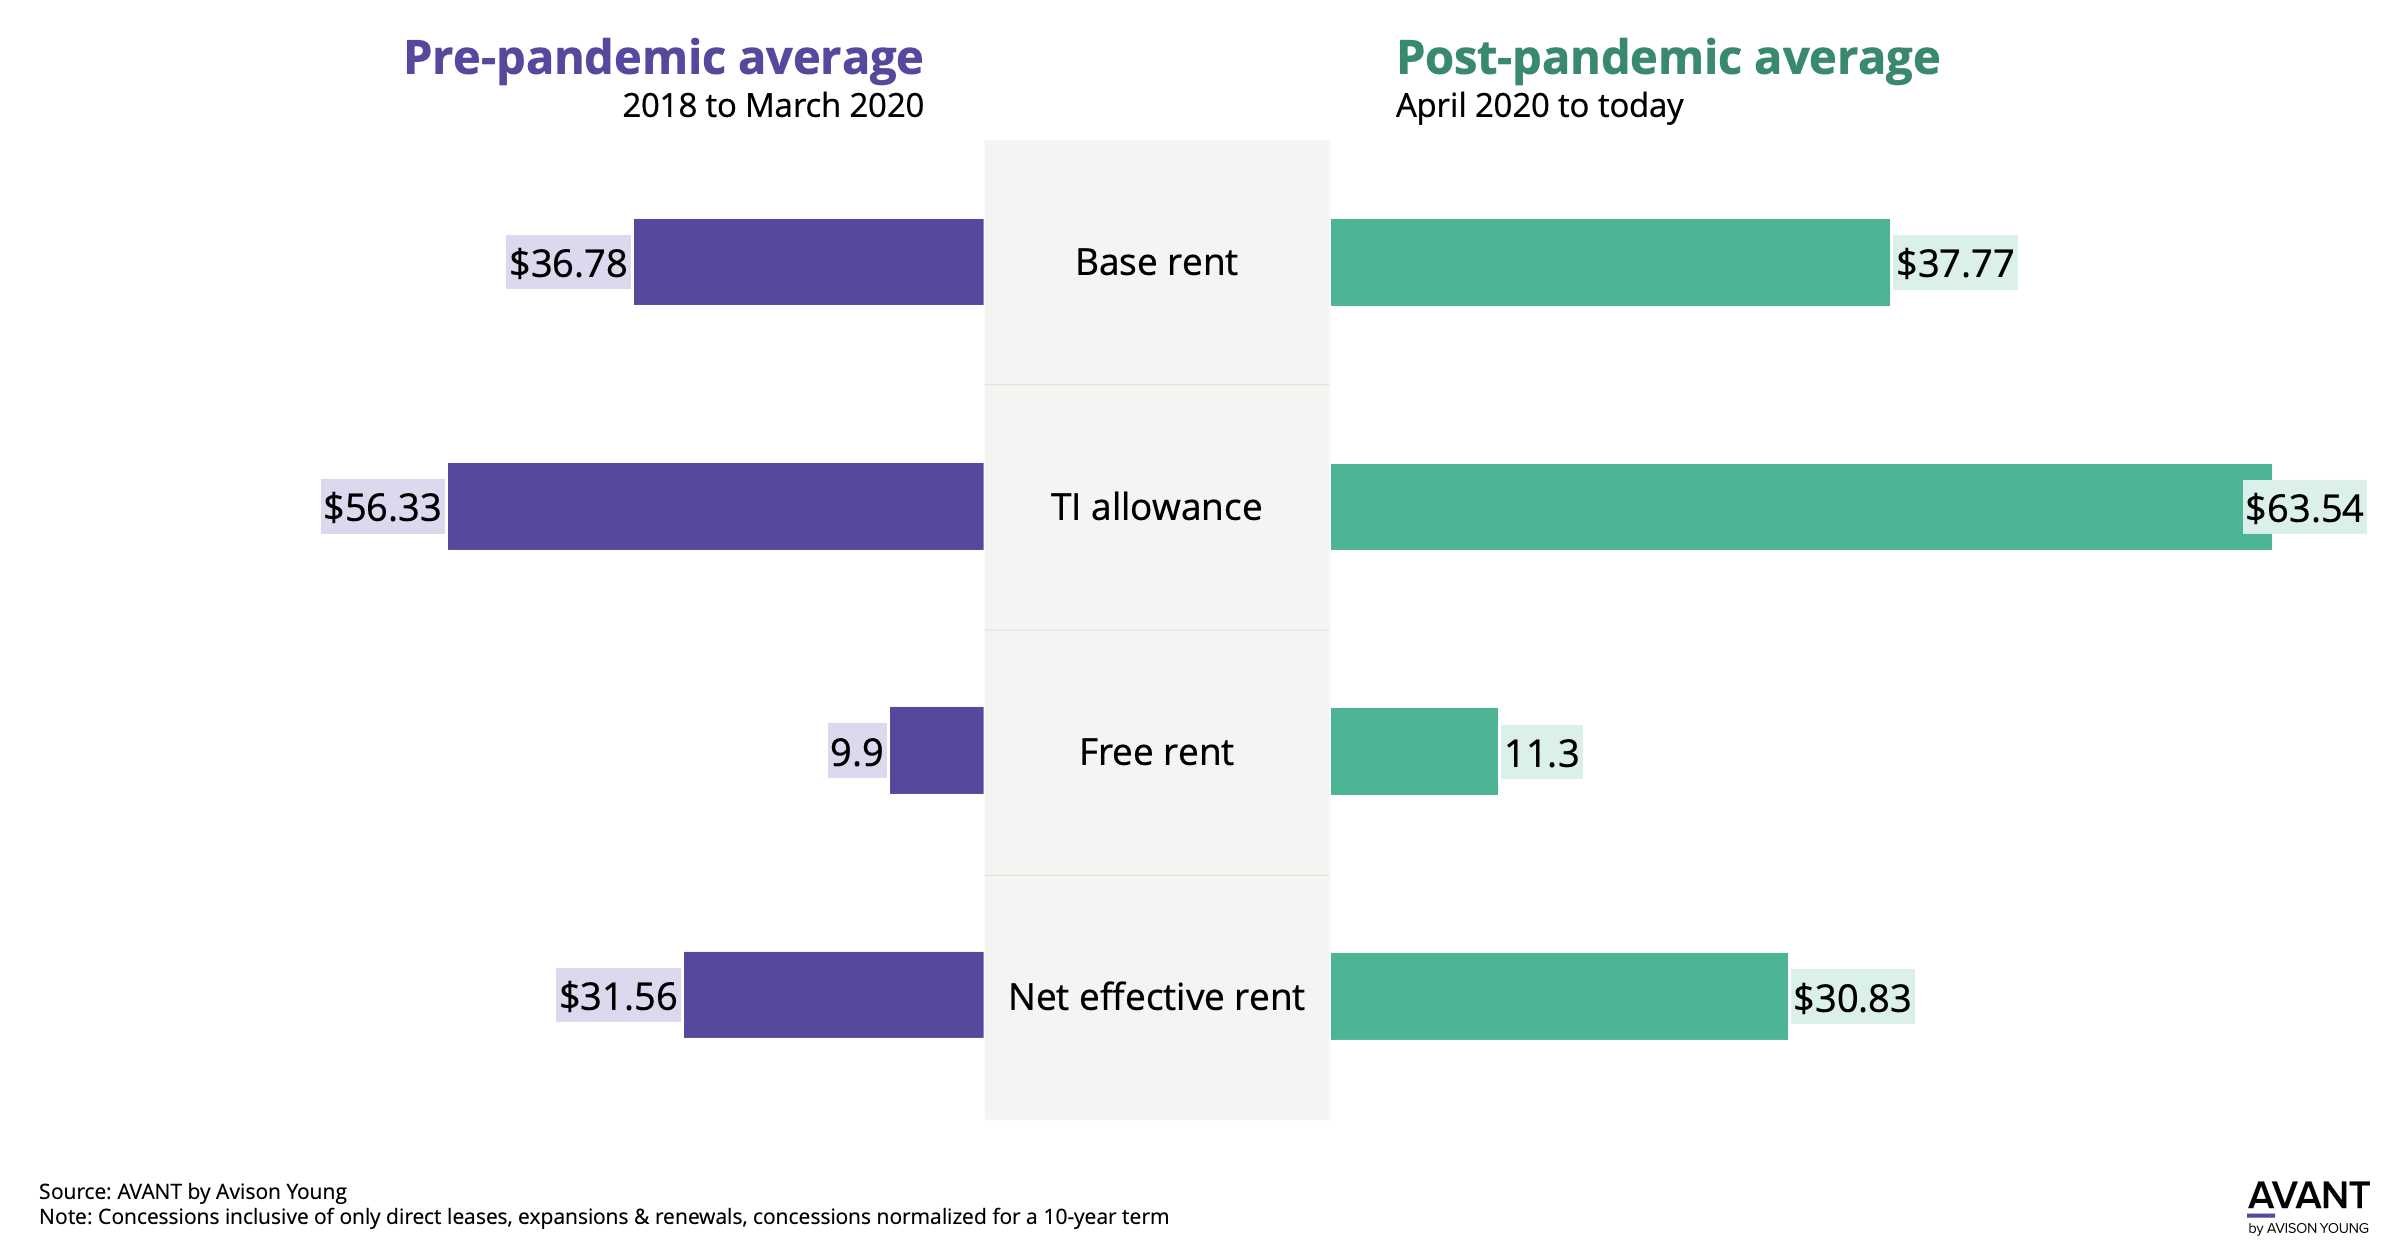 Tenant Improvement allowances in Houston pre-pandemic and post-pandemic